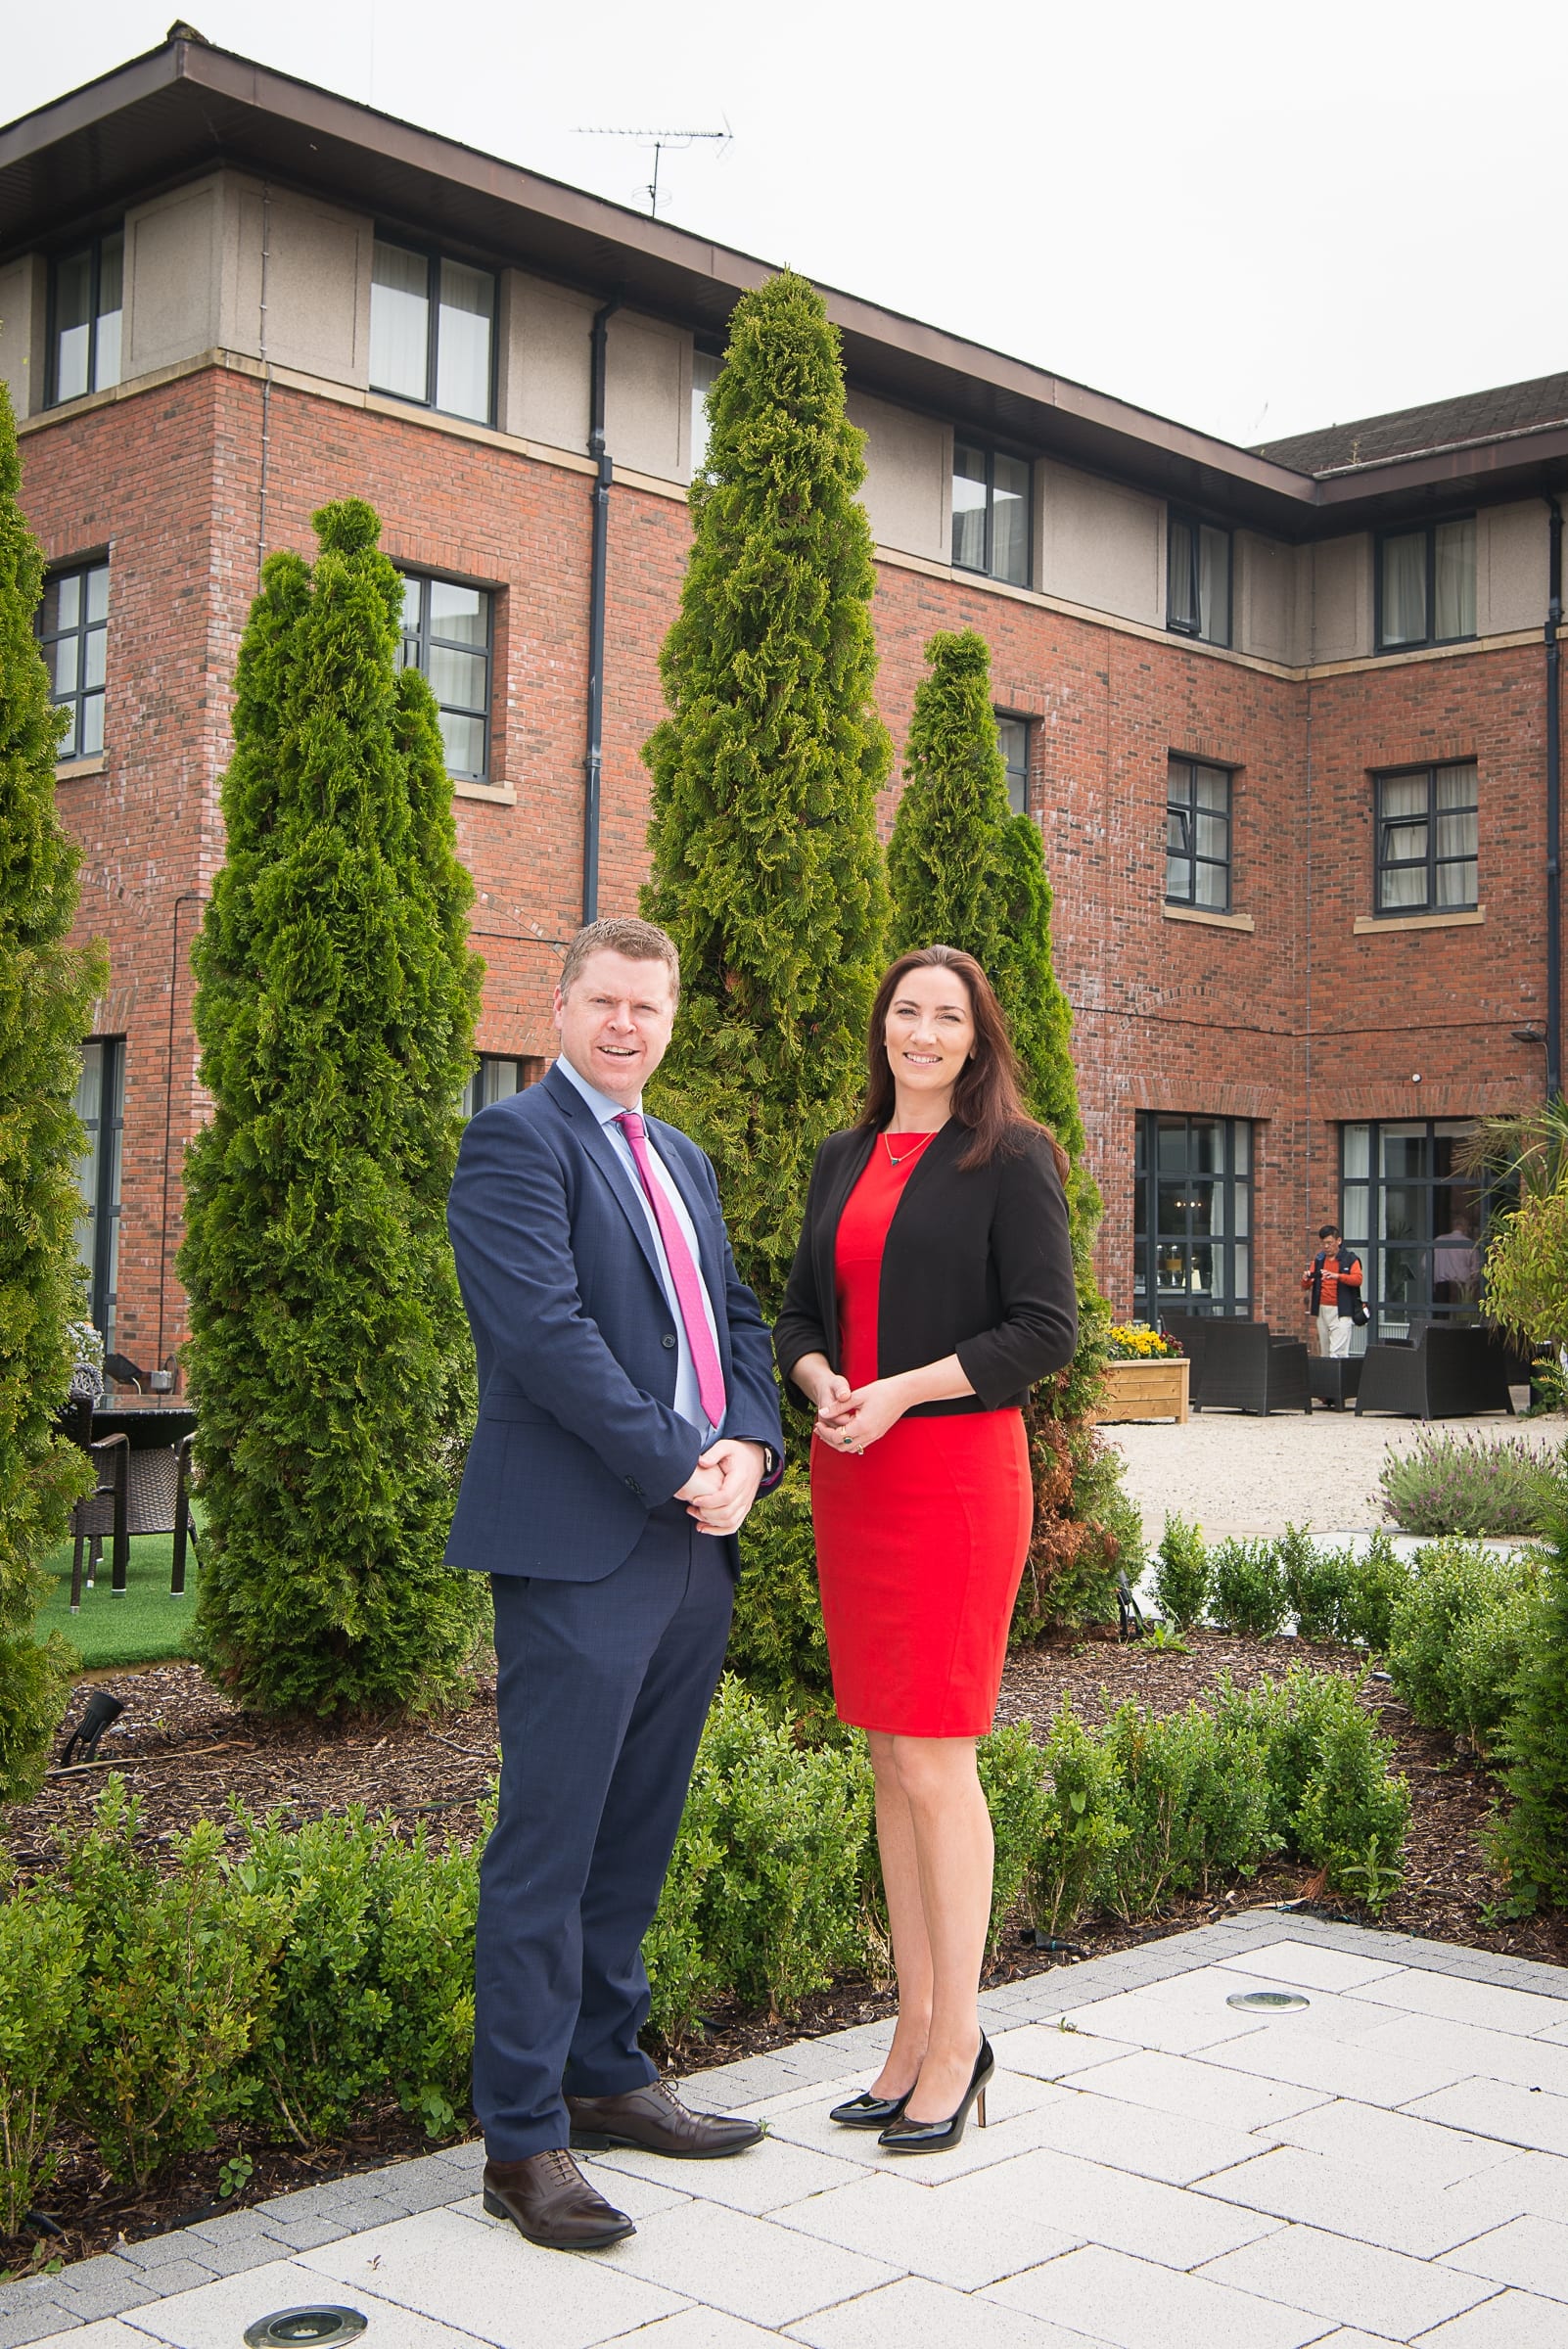 From Left to Right:  Launch of Limerick Chamber President Awards held in the Castletroy Park Hotel on 25th June 2019: Eoin Ryan - Limerick Chamber President / HLBMGR, Gillian Barry -  LIT
Photo by Morning Star Photography